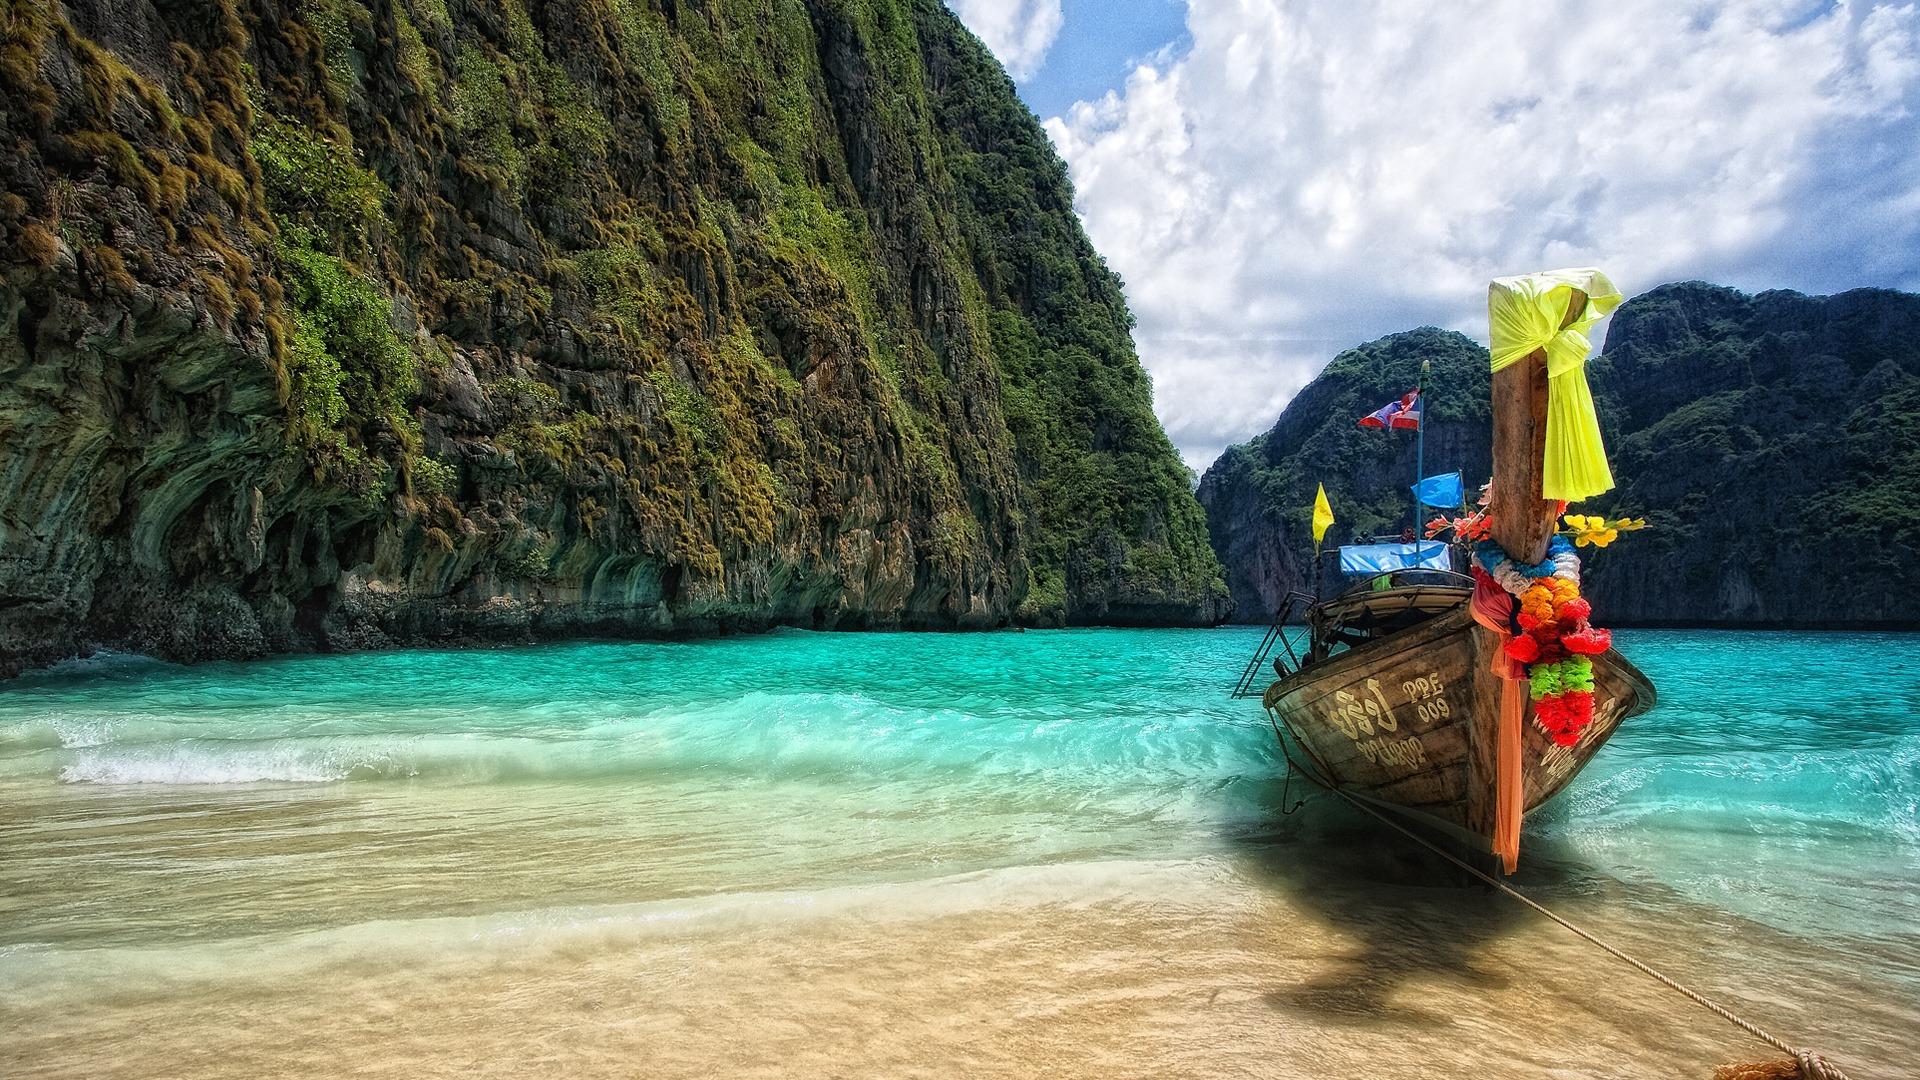 Boat near the shore in Phuket wallpaper and image